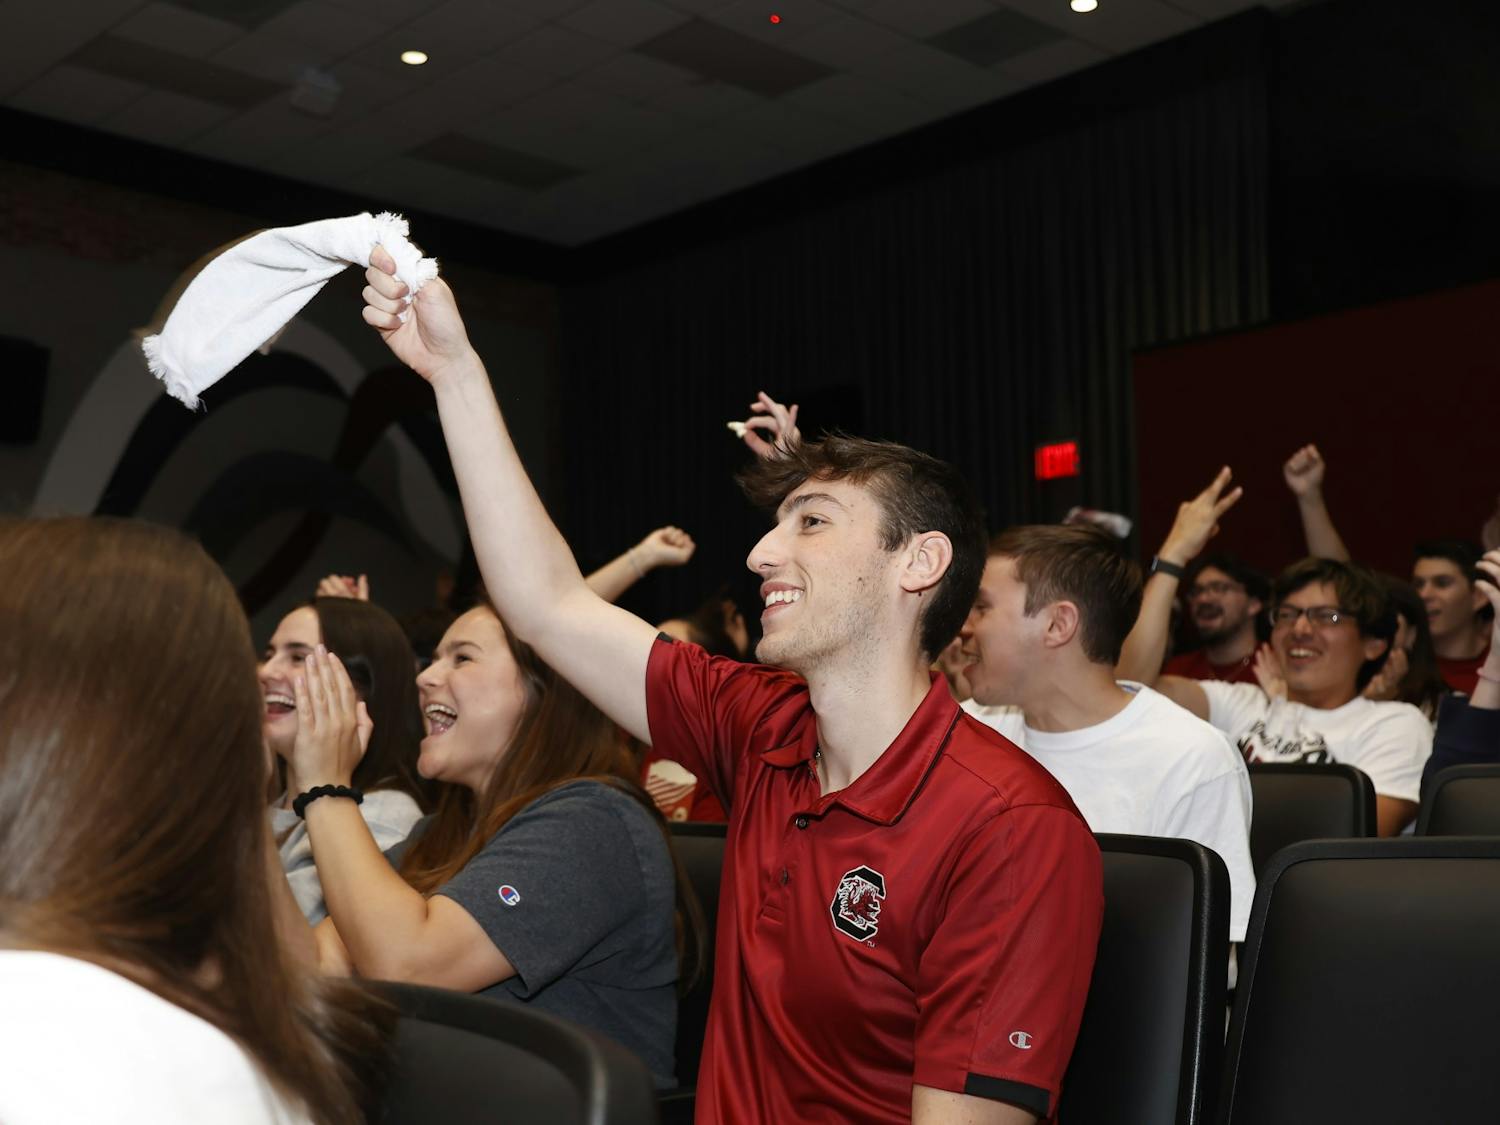 South Carolina students cheer on the women’s basketball team at a watch party in the Russell House Theater on April 3, 2022. The watch party was hosted by Gamecock Entertainment. &nbsp;